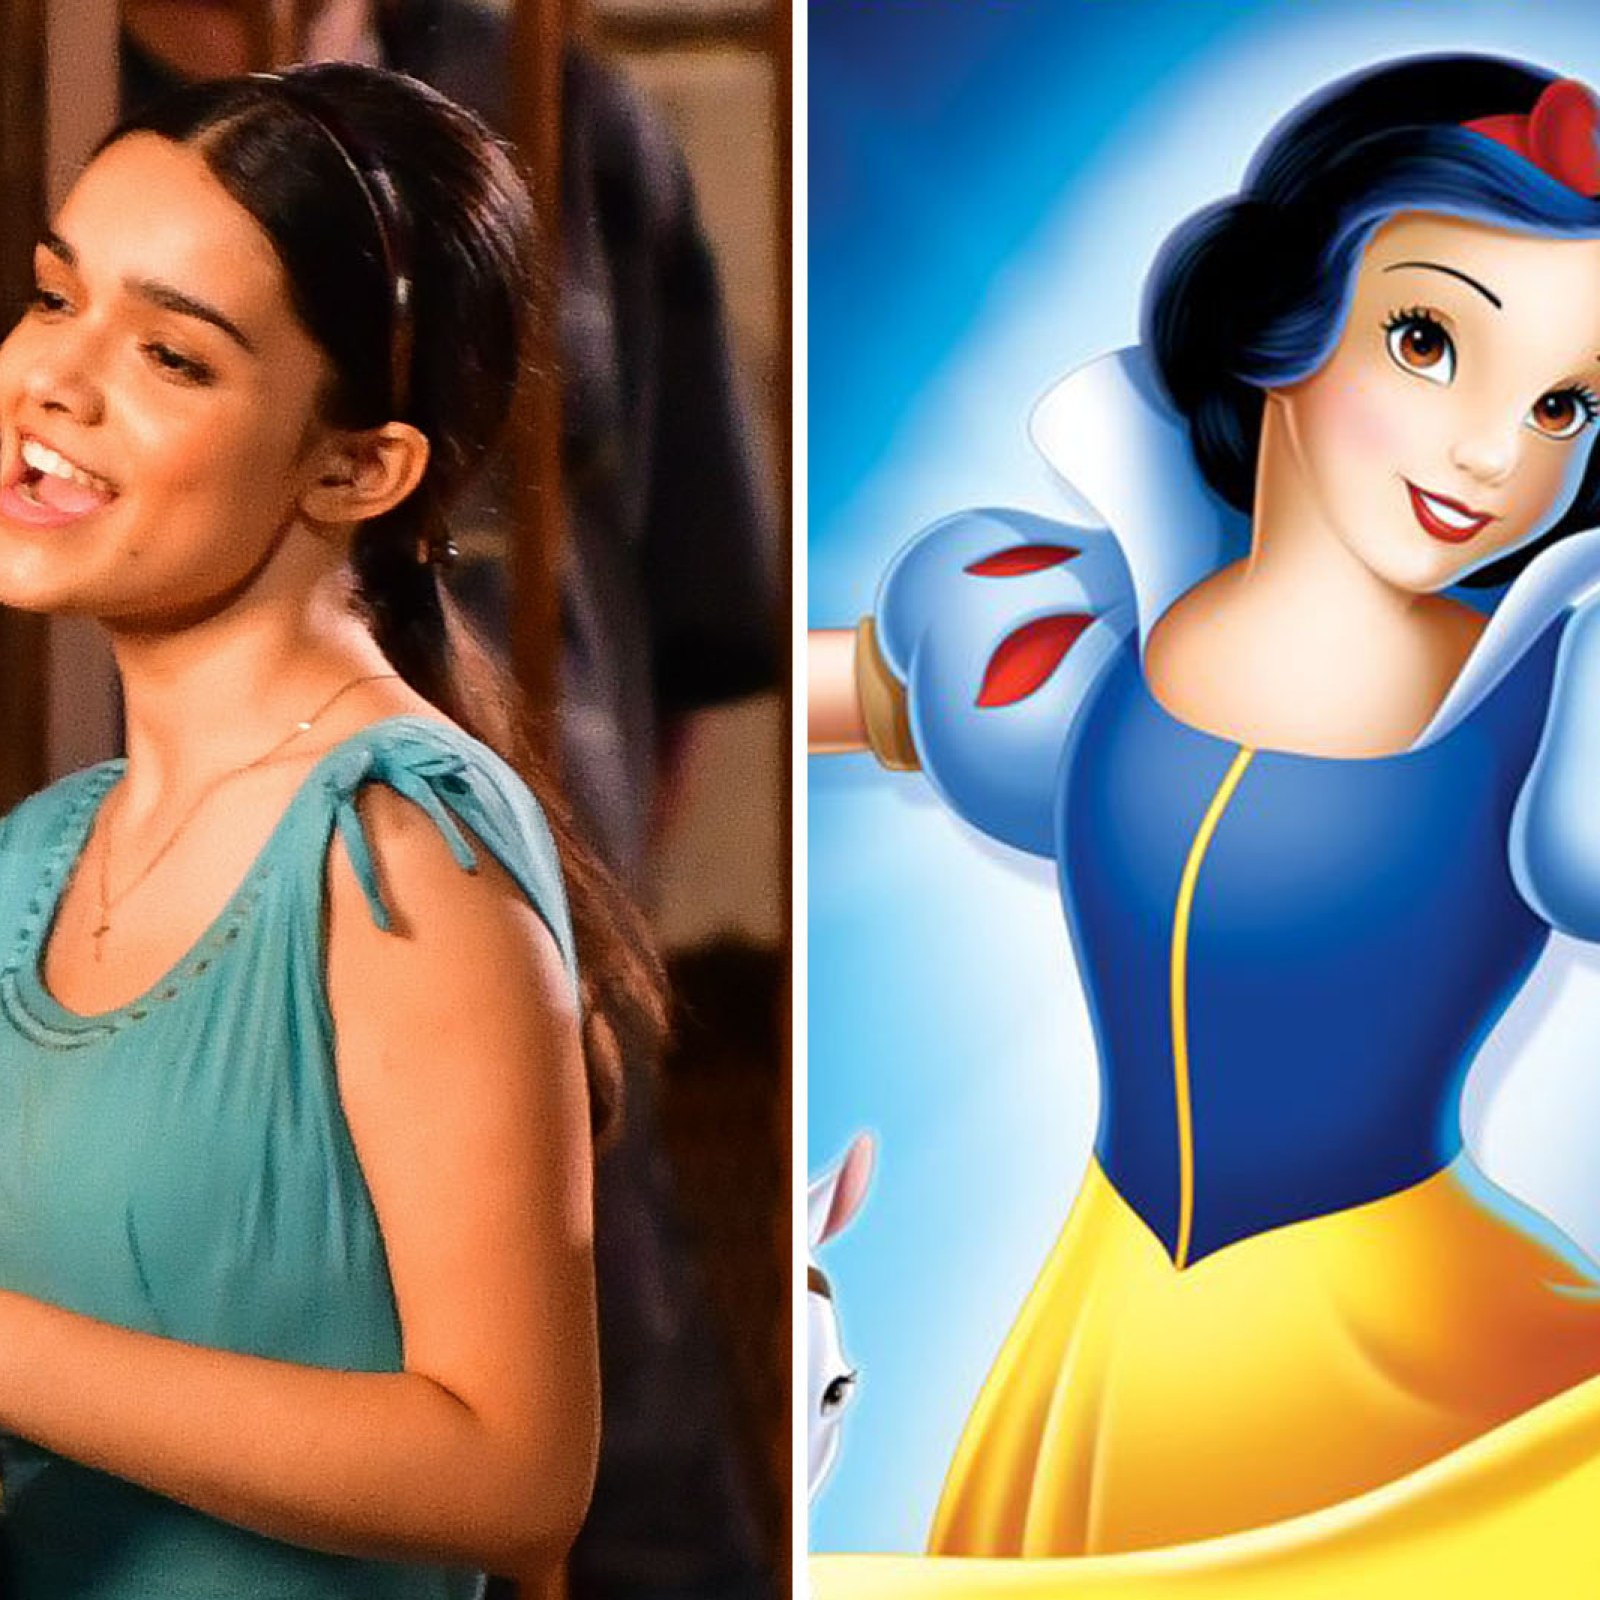 Ebony Disney Porn - Rachel Zegler as Snow White Leaves Gab Users Outraged at 'Black' Actress in  Role